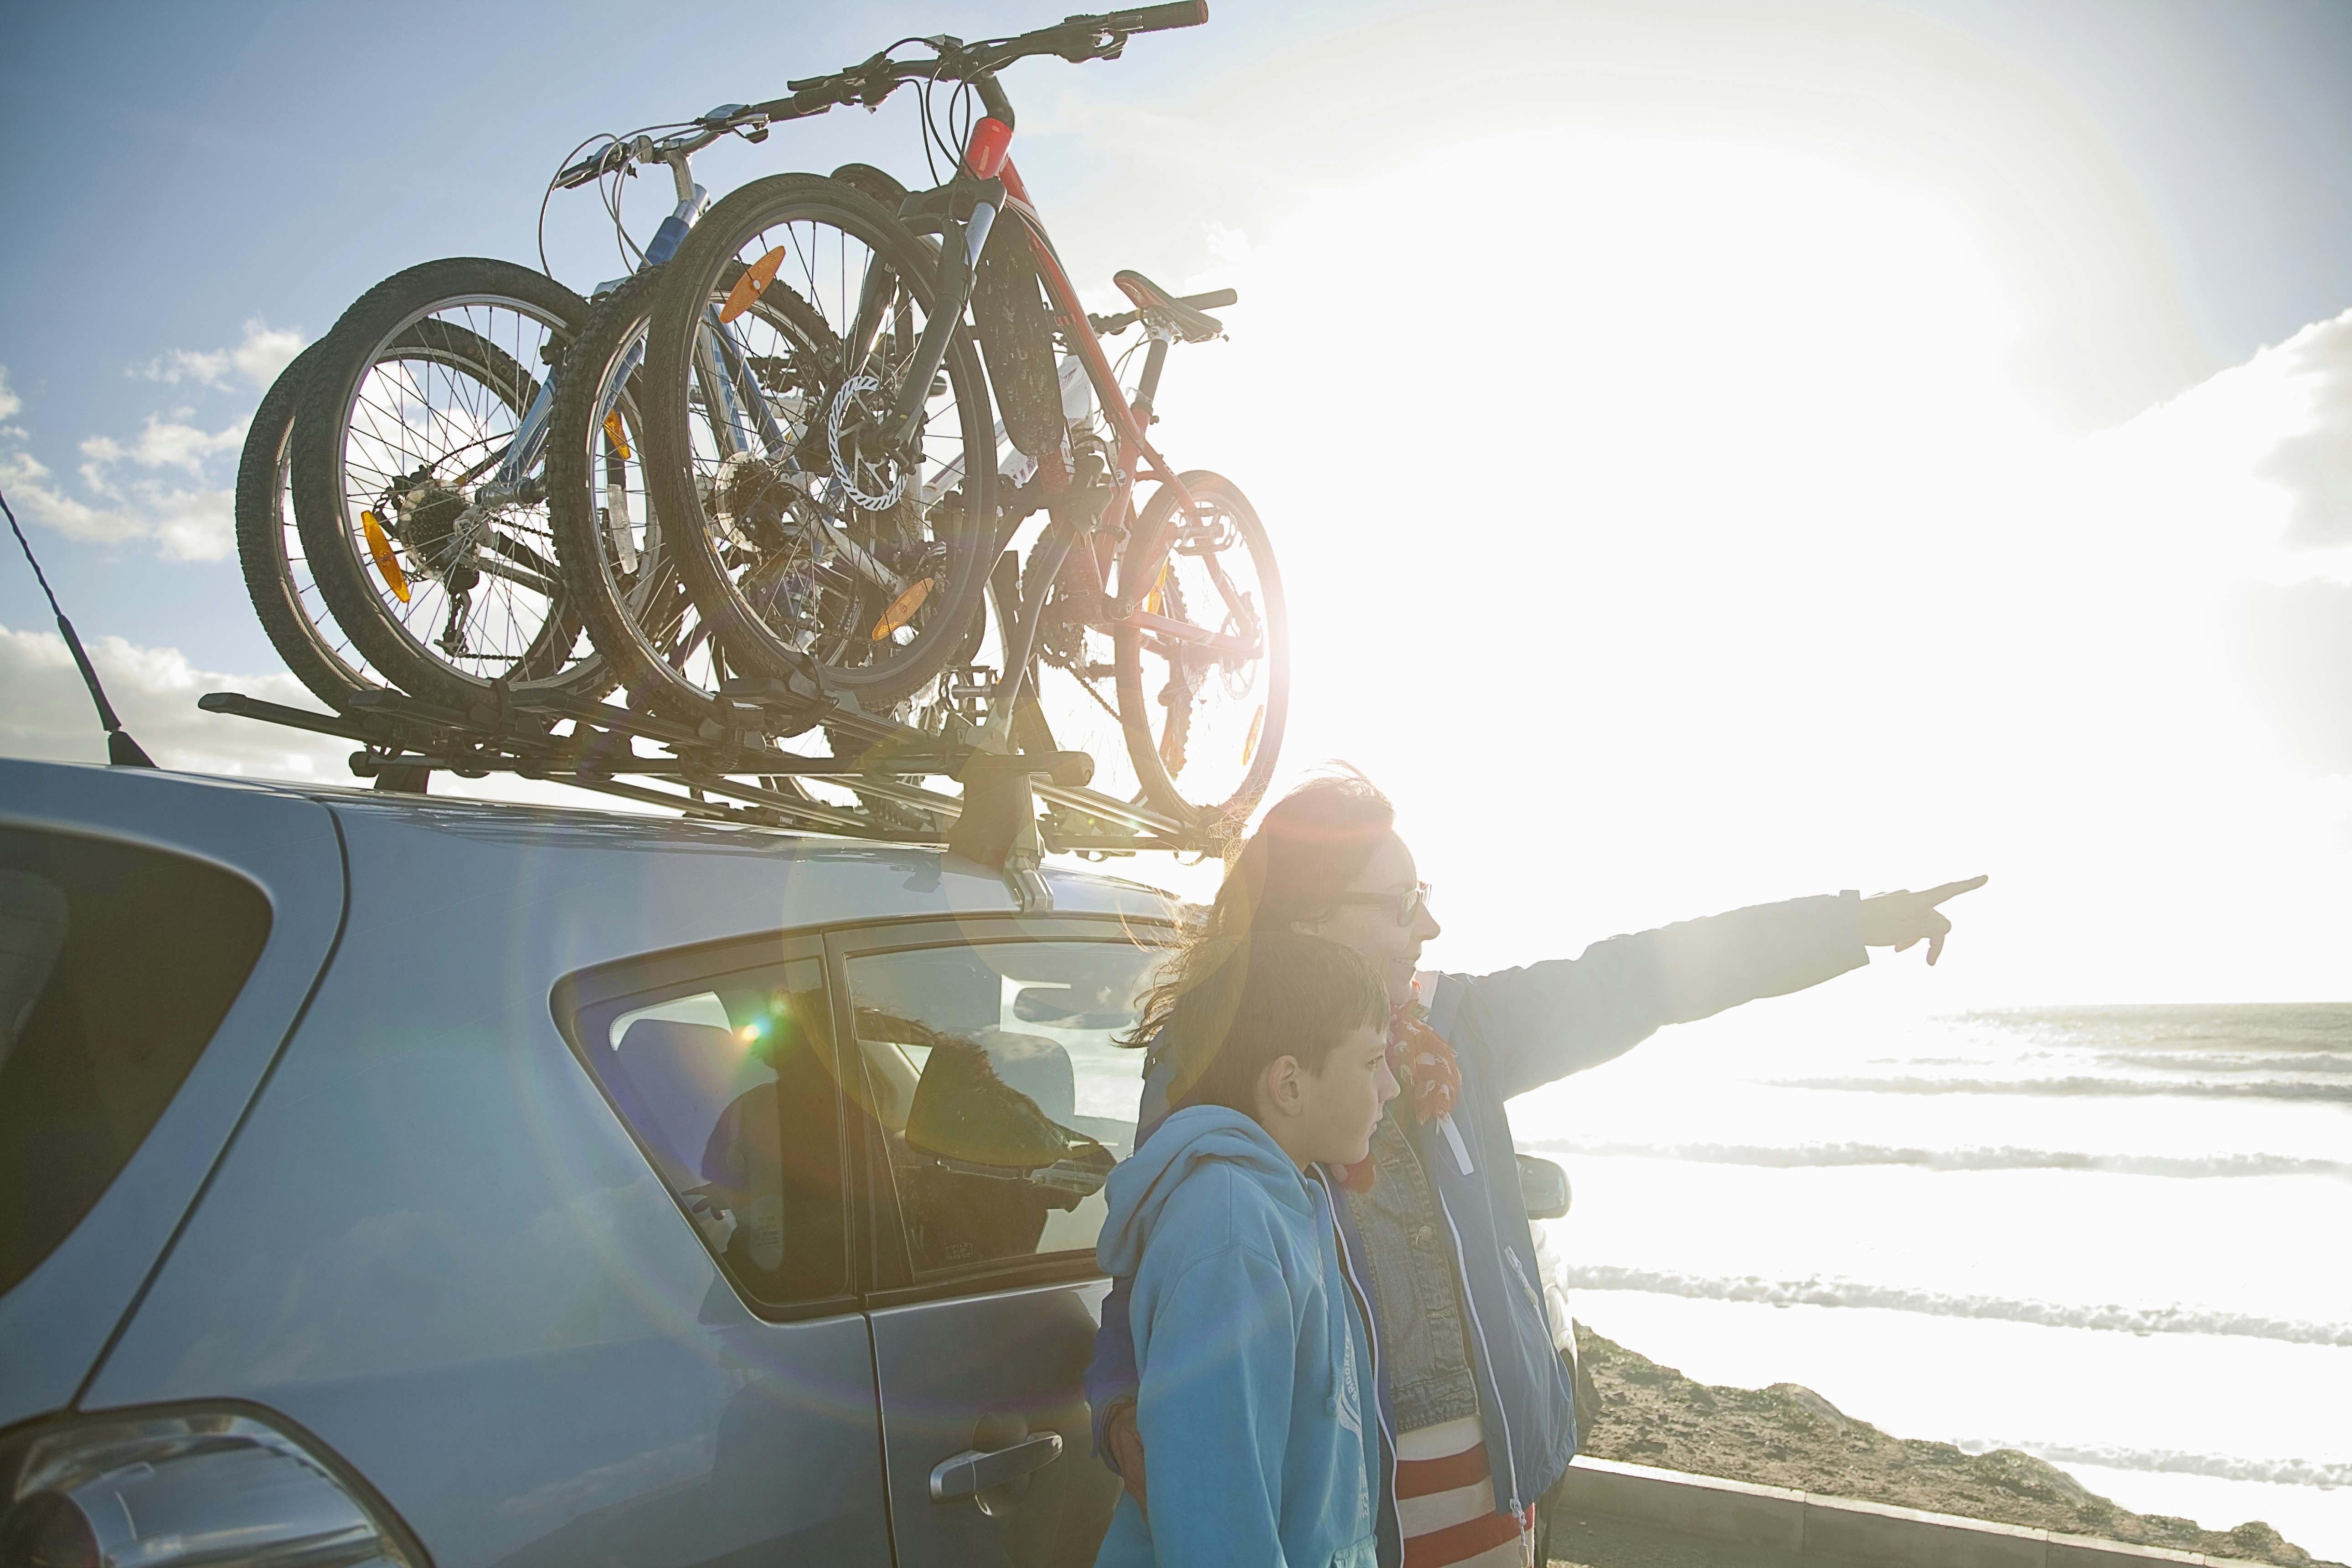 Mother and son overlooking beach, standing by car with bikes on the rack